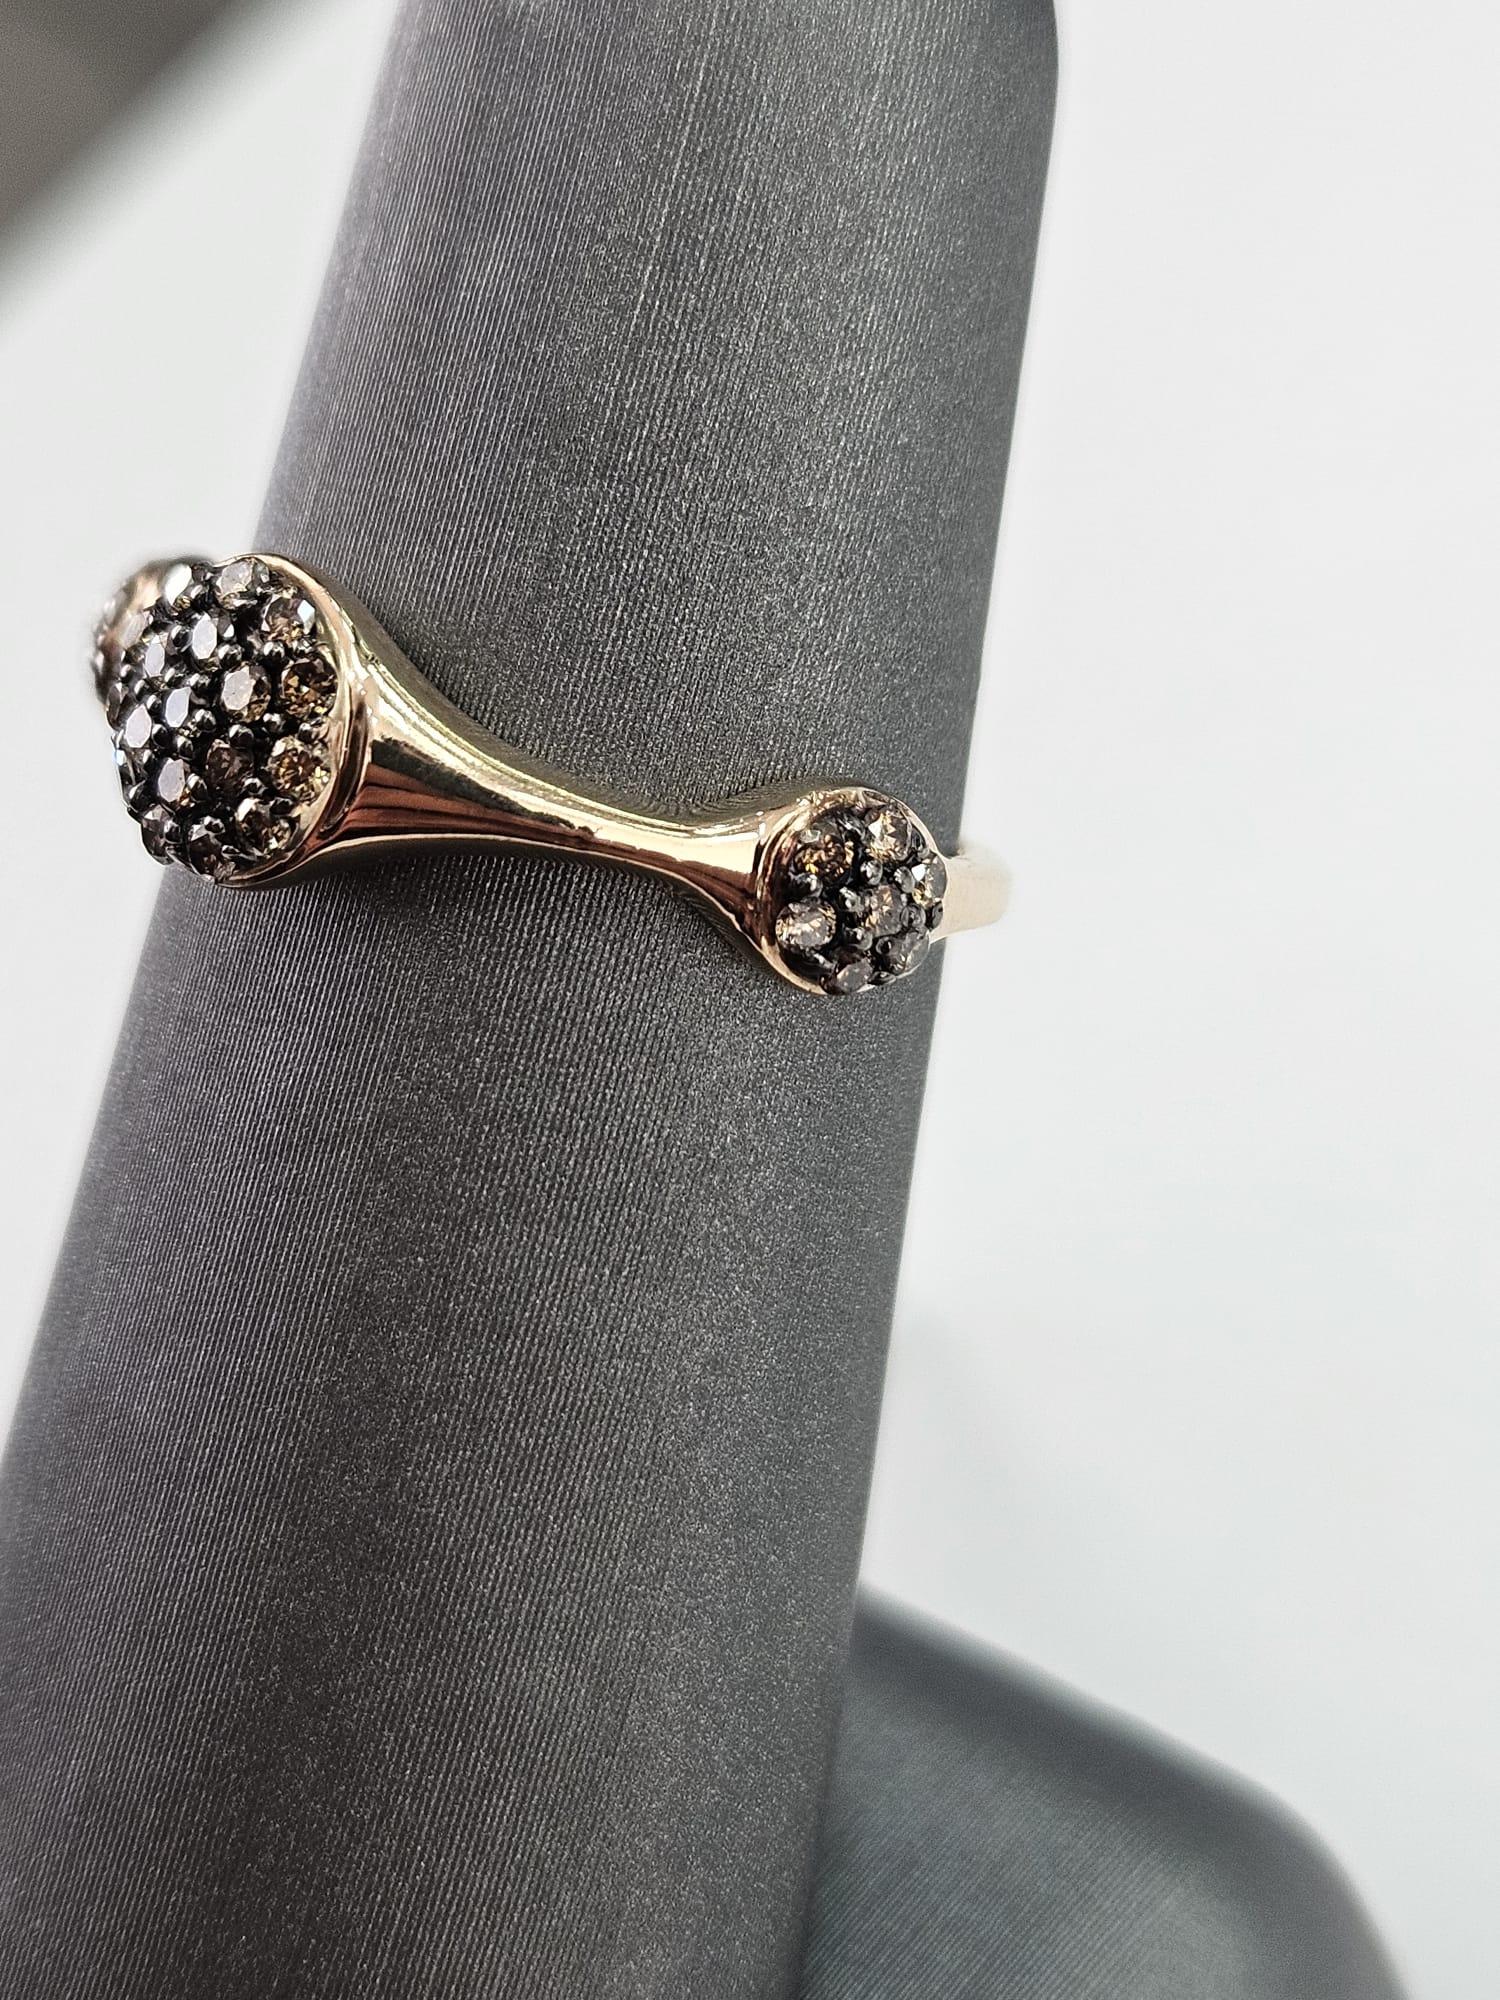 Introducing a striking Brown Diamond cluster ring, a unique and captivating piece that exudes warmth and elegance. With a total carat weight of 0.31 carats, this ring features three horizontally oriented oval-like shapes, each filled with lustrous